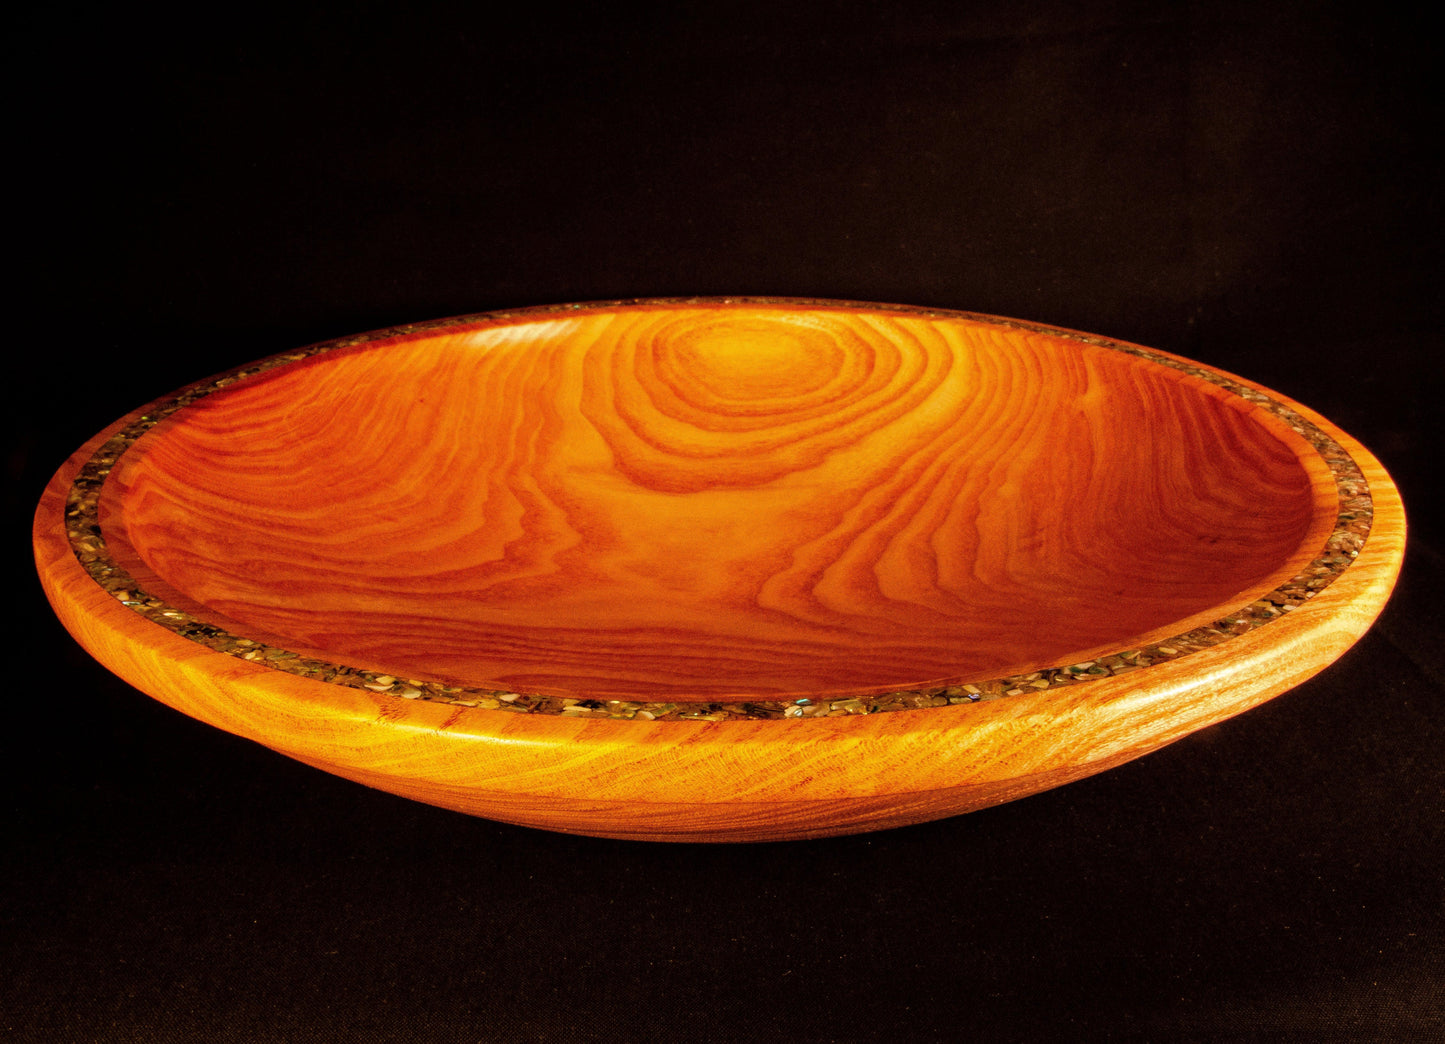 Honey Locust Platter. Dramatic edge feature with abalone shell adds sparkle to a strongly figured platter.